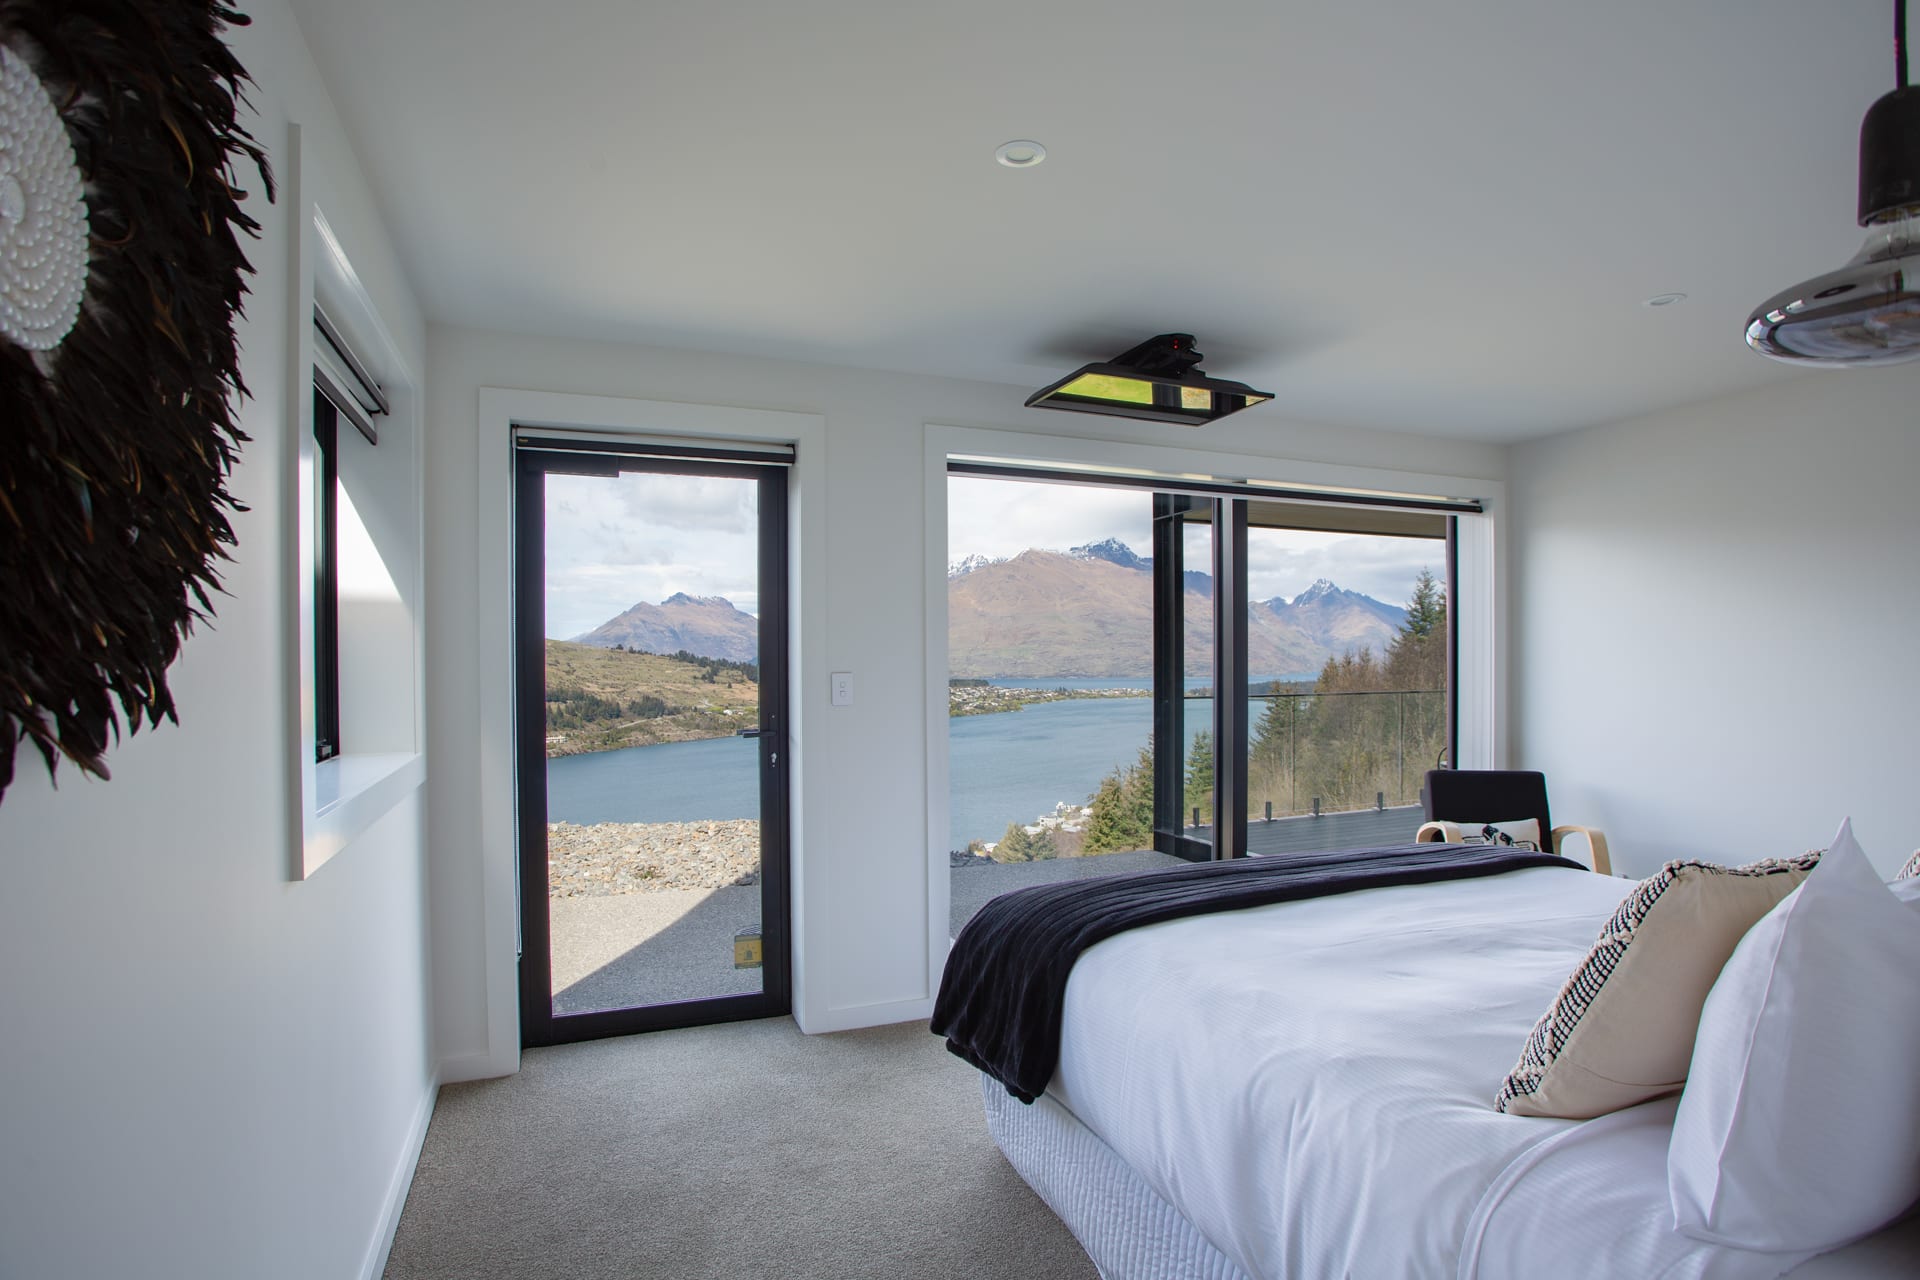 Incredible views from your bed